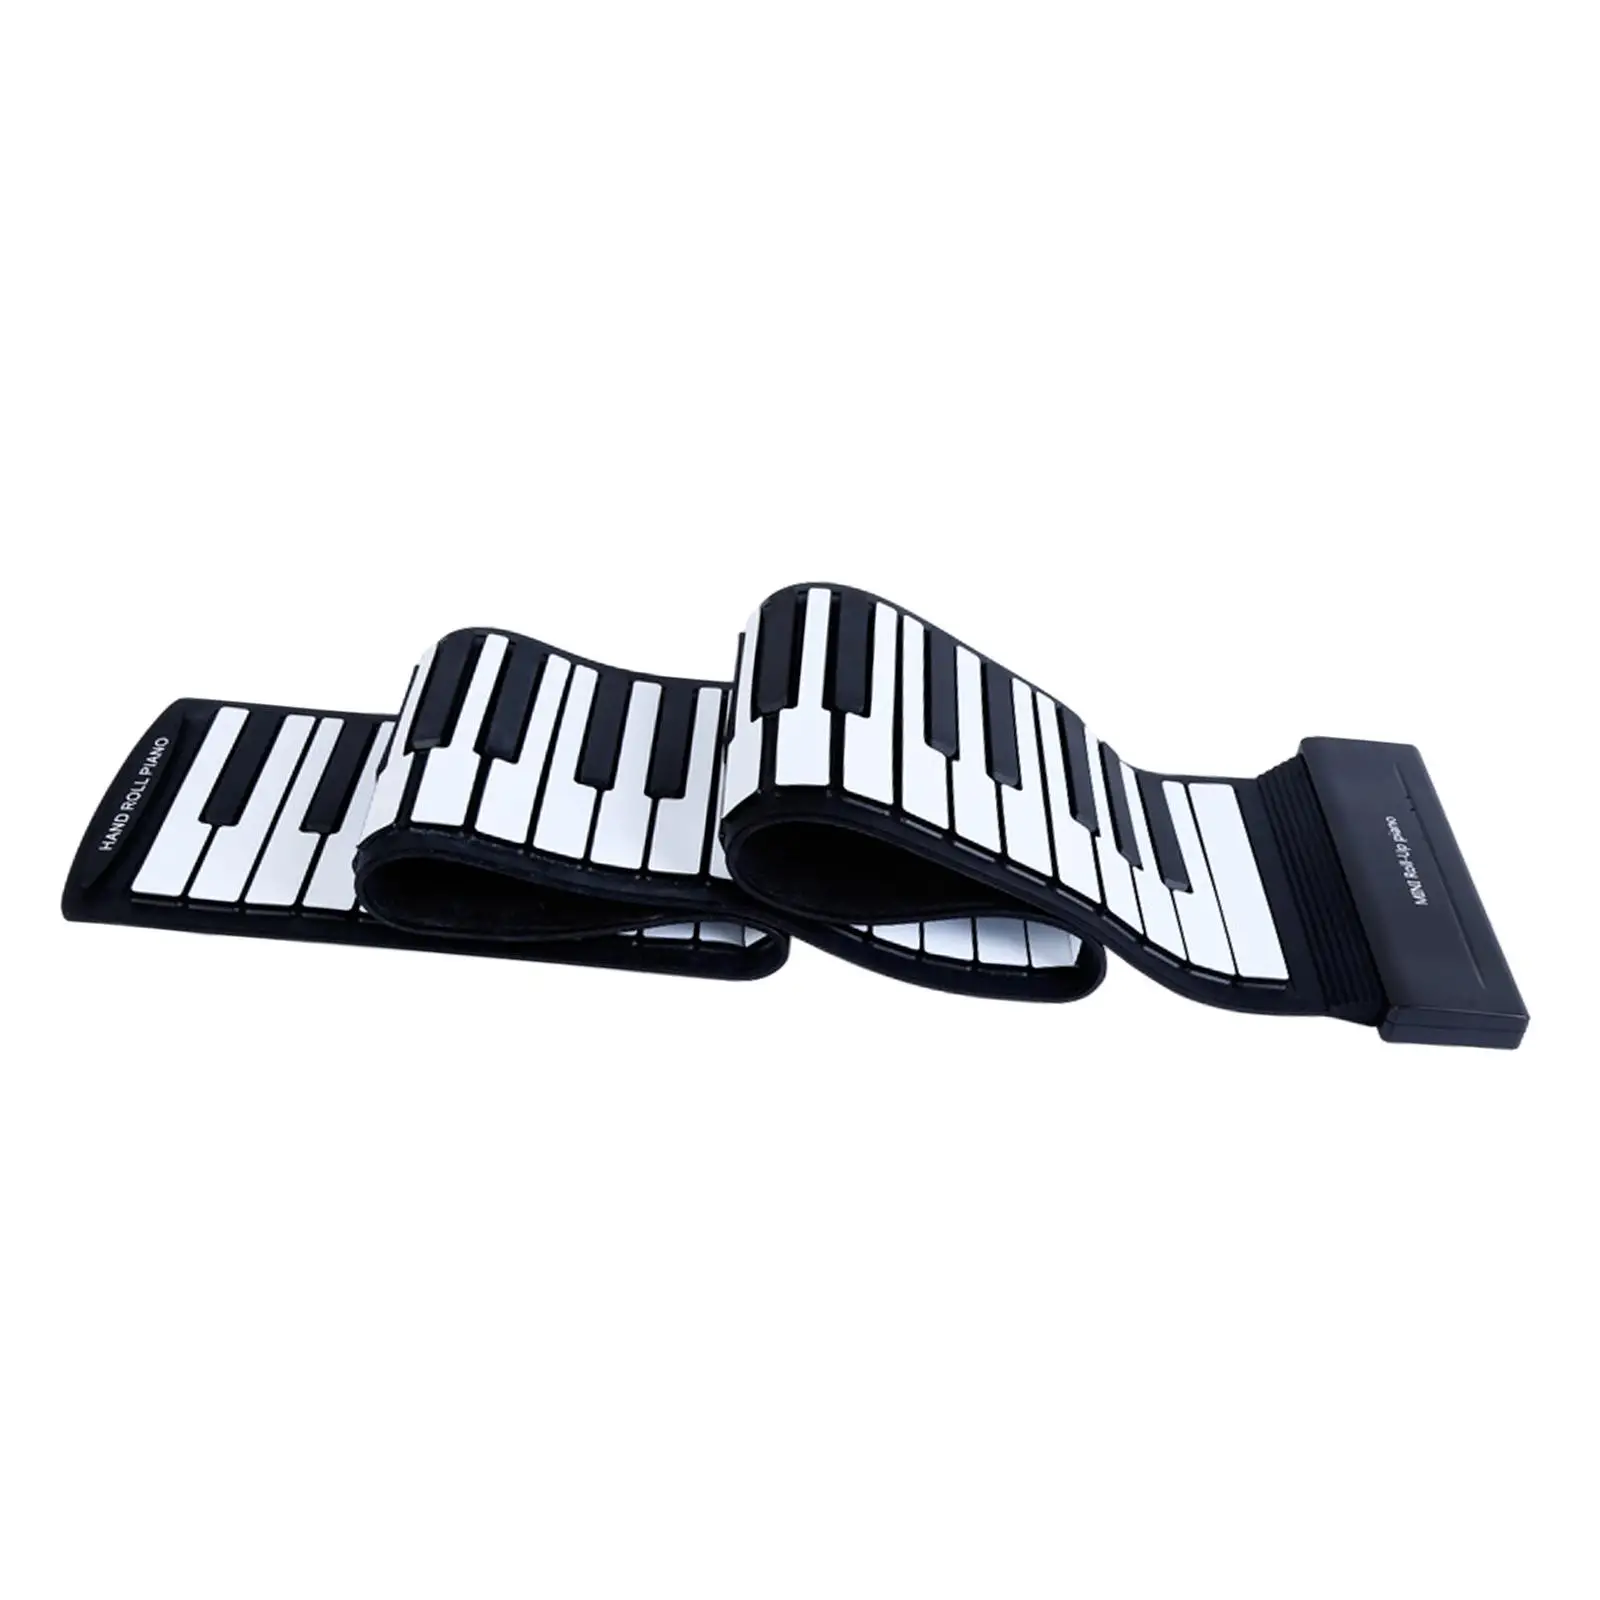 

Roll up 88 Keys Piano Keyboard Travel Piano Digital Music Toy Silicone for Home Living Room Classroom Teaching Holiday Gift Kids